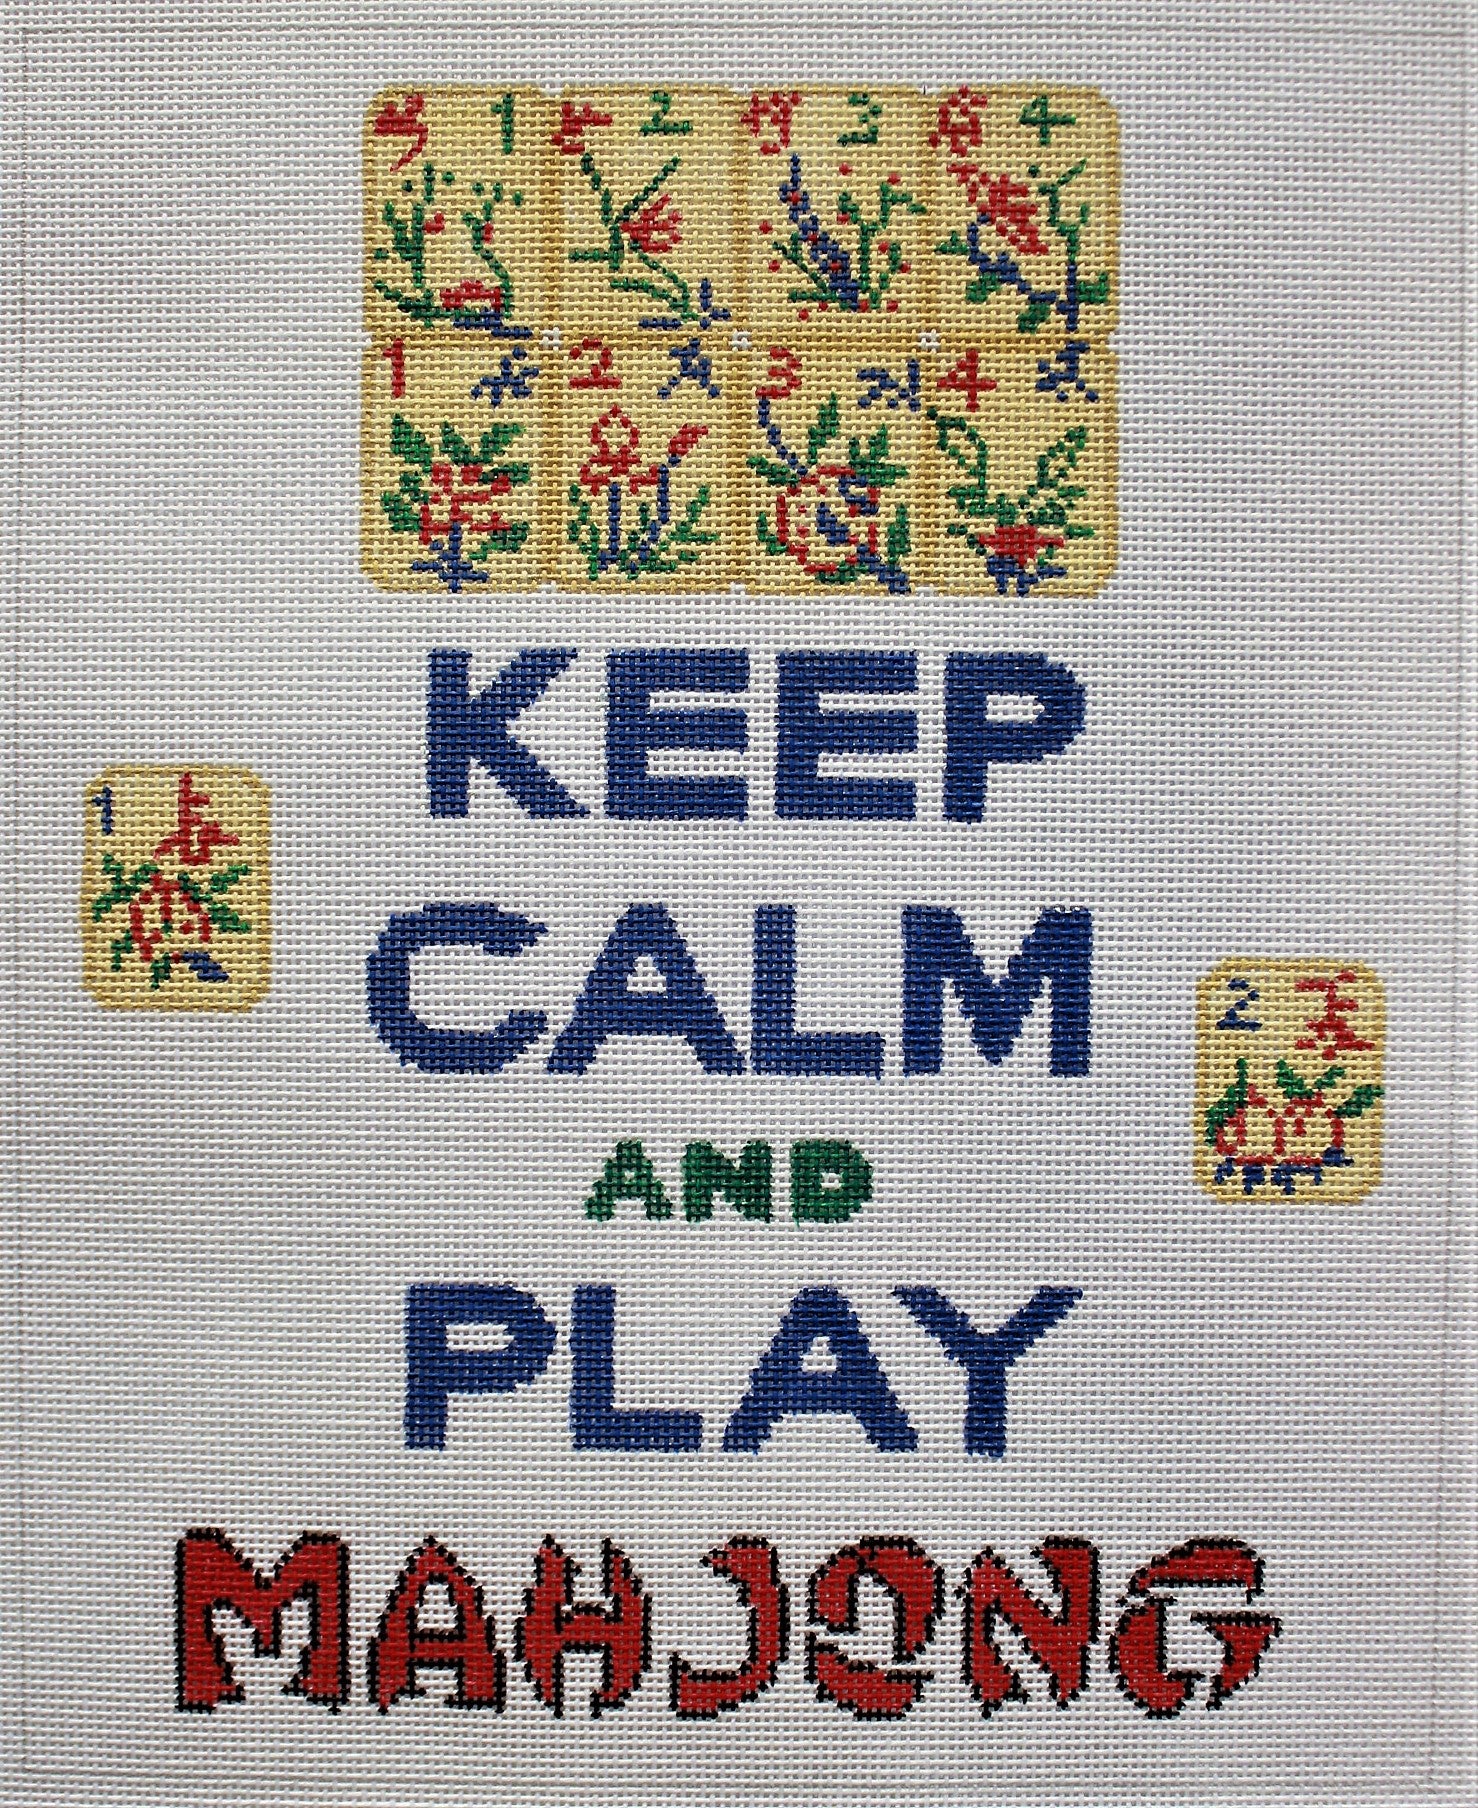 Keep Calm & Shop On hand-painted needlepoint stitching canvas